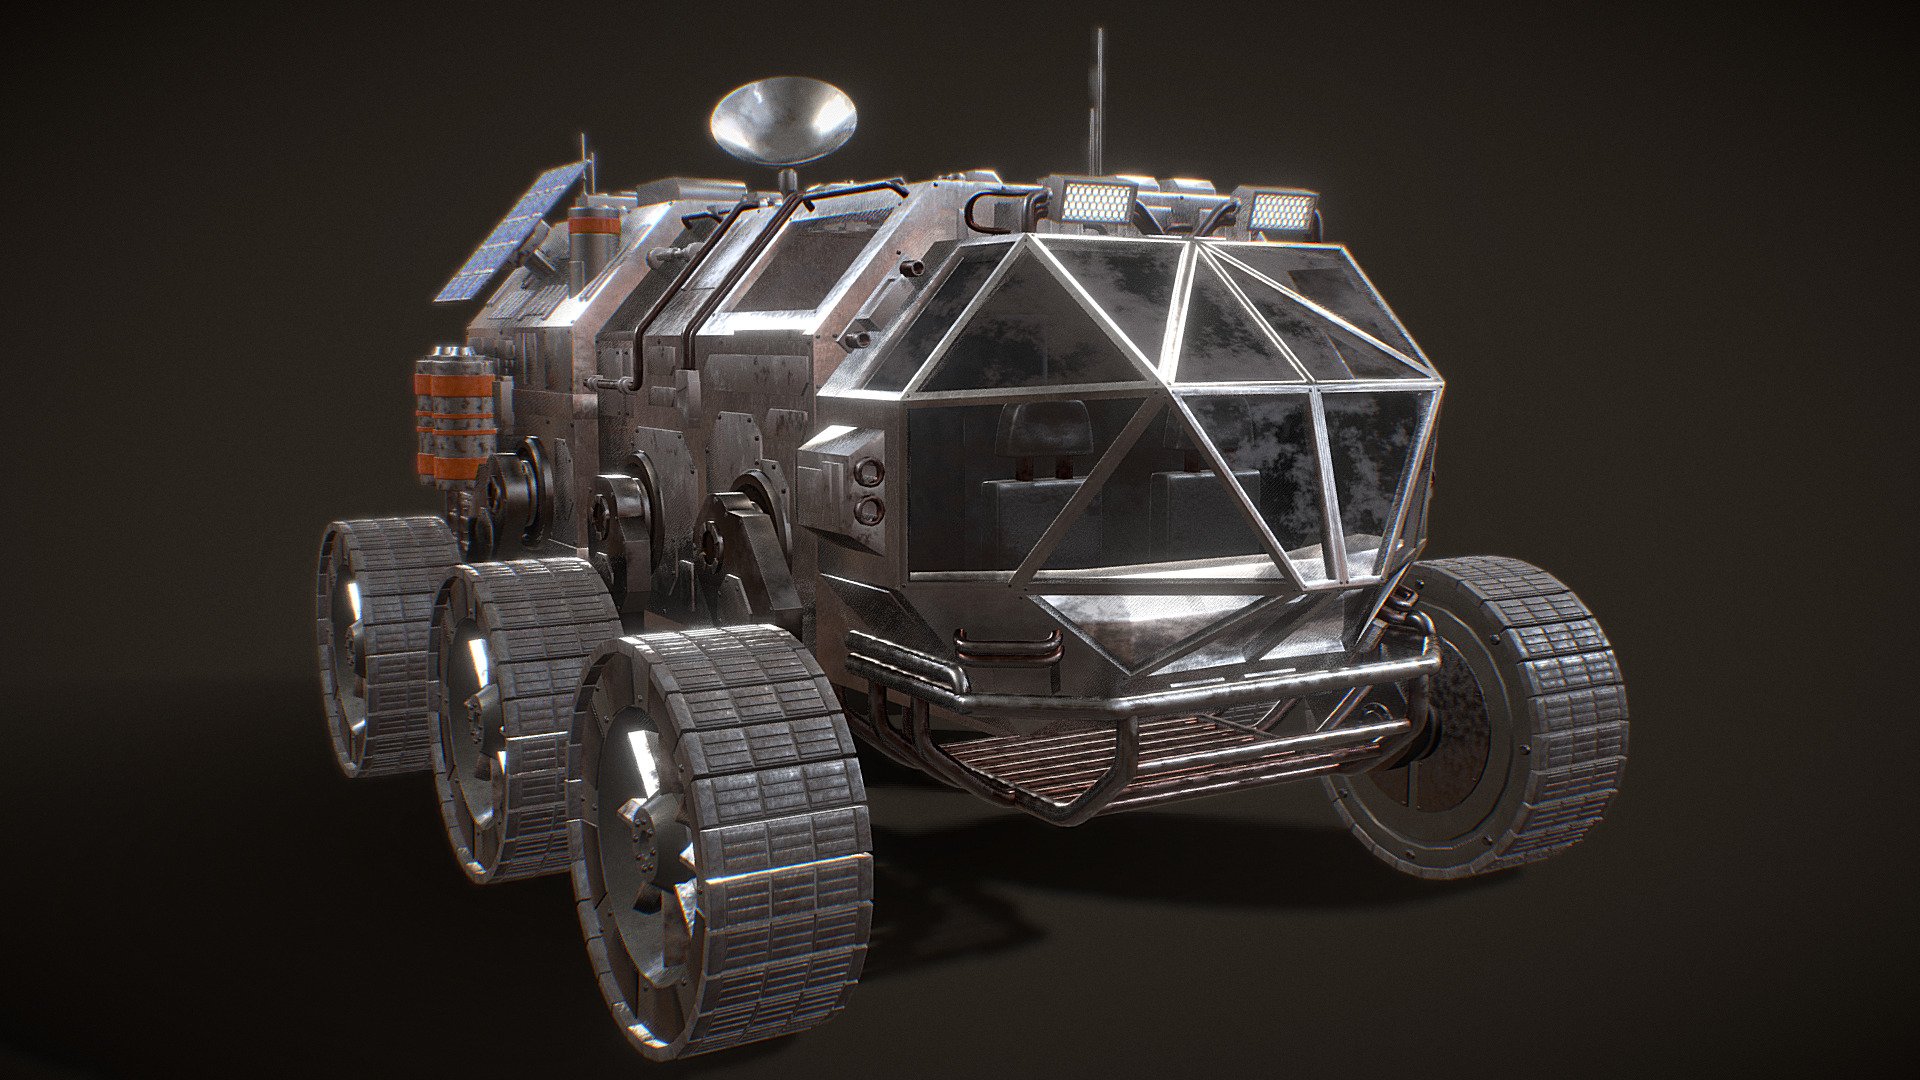 Mars rover 3d model, created with Blender. All of the textures have been baked to .jpg files at 4K resolution.  (4096x4096)

Notes: Some of the objects have bevel and mirror modifiers on them in Blender. This product does not come with a mars environment, just the rover 3d model.

Contents:




Mars Rover Blender File

HDRI Lighting

Final Renders

Product Images

All Texture Maps:




Color

Metallic

Roughness

Normal

Emission

Glass Factor

Verts: 99,067

Faces: 84,066

Check out the artwork on Art Station here.

Watch the creation process video:  https://youtu.be/H-fLFelHWD4 - Mars Rover (Blender) - Buy Royalty Free 3D model by Ryan King Art (@ryankingart) 3d model